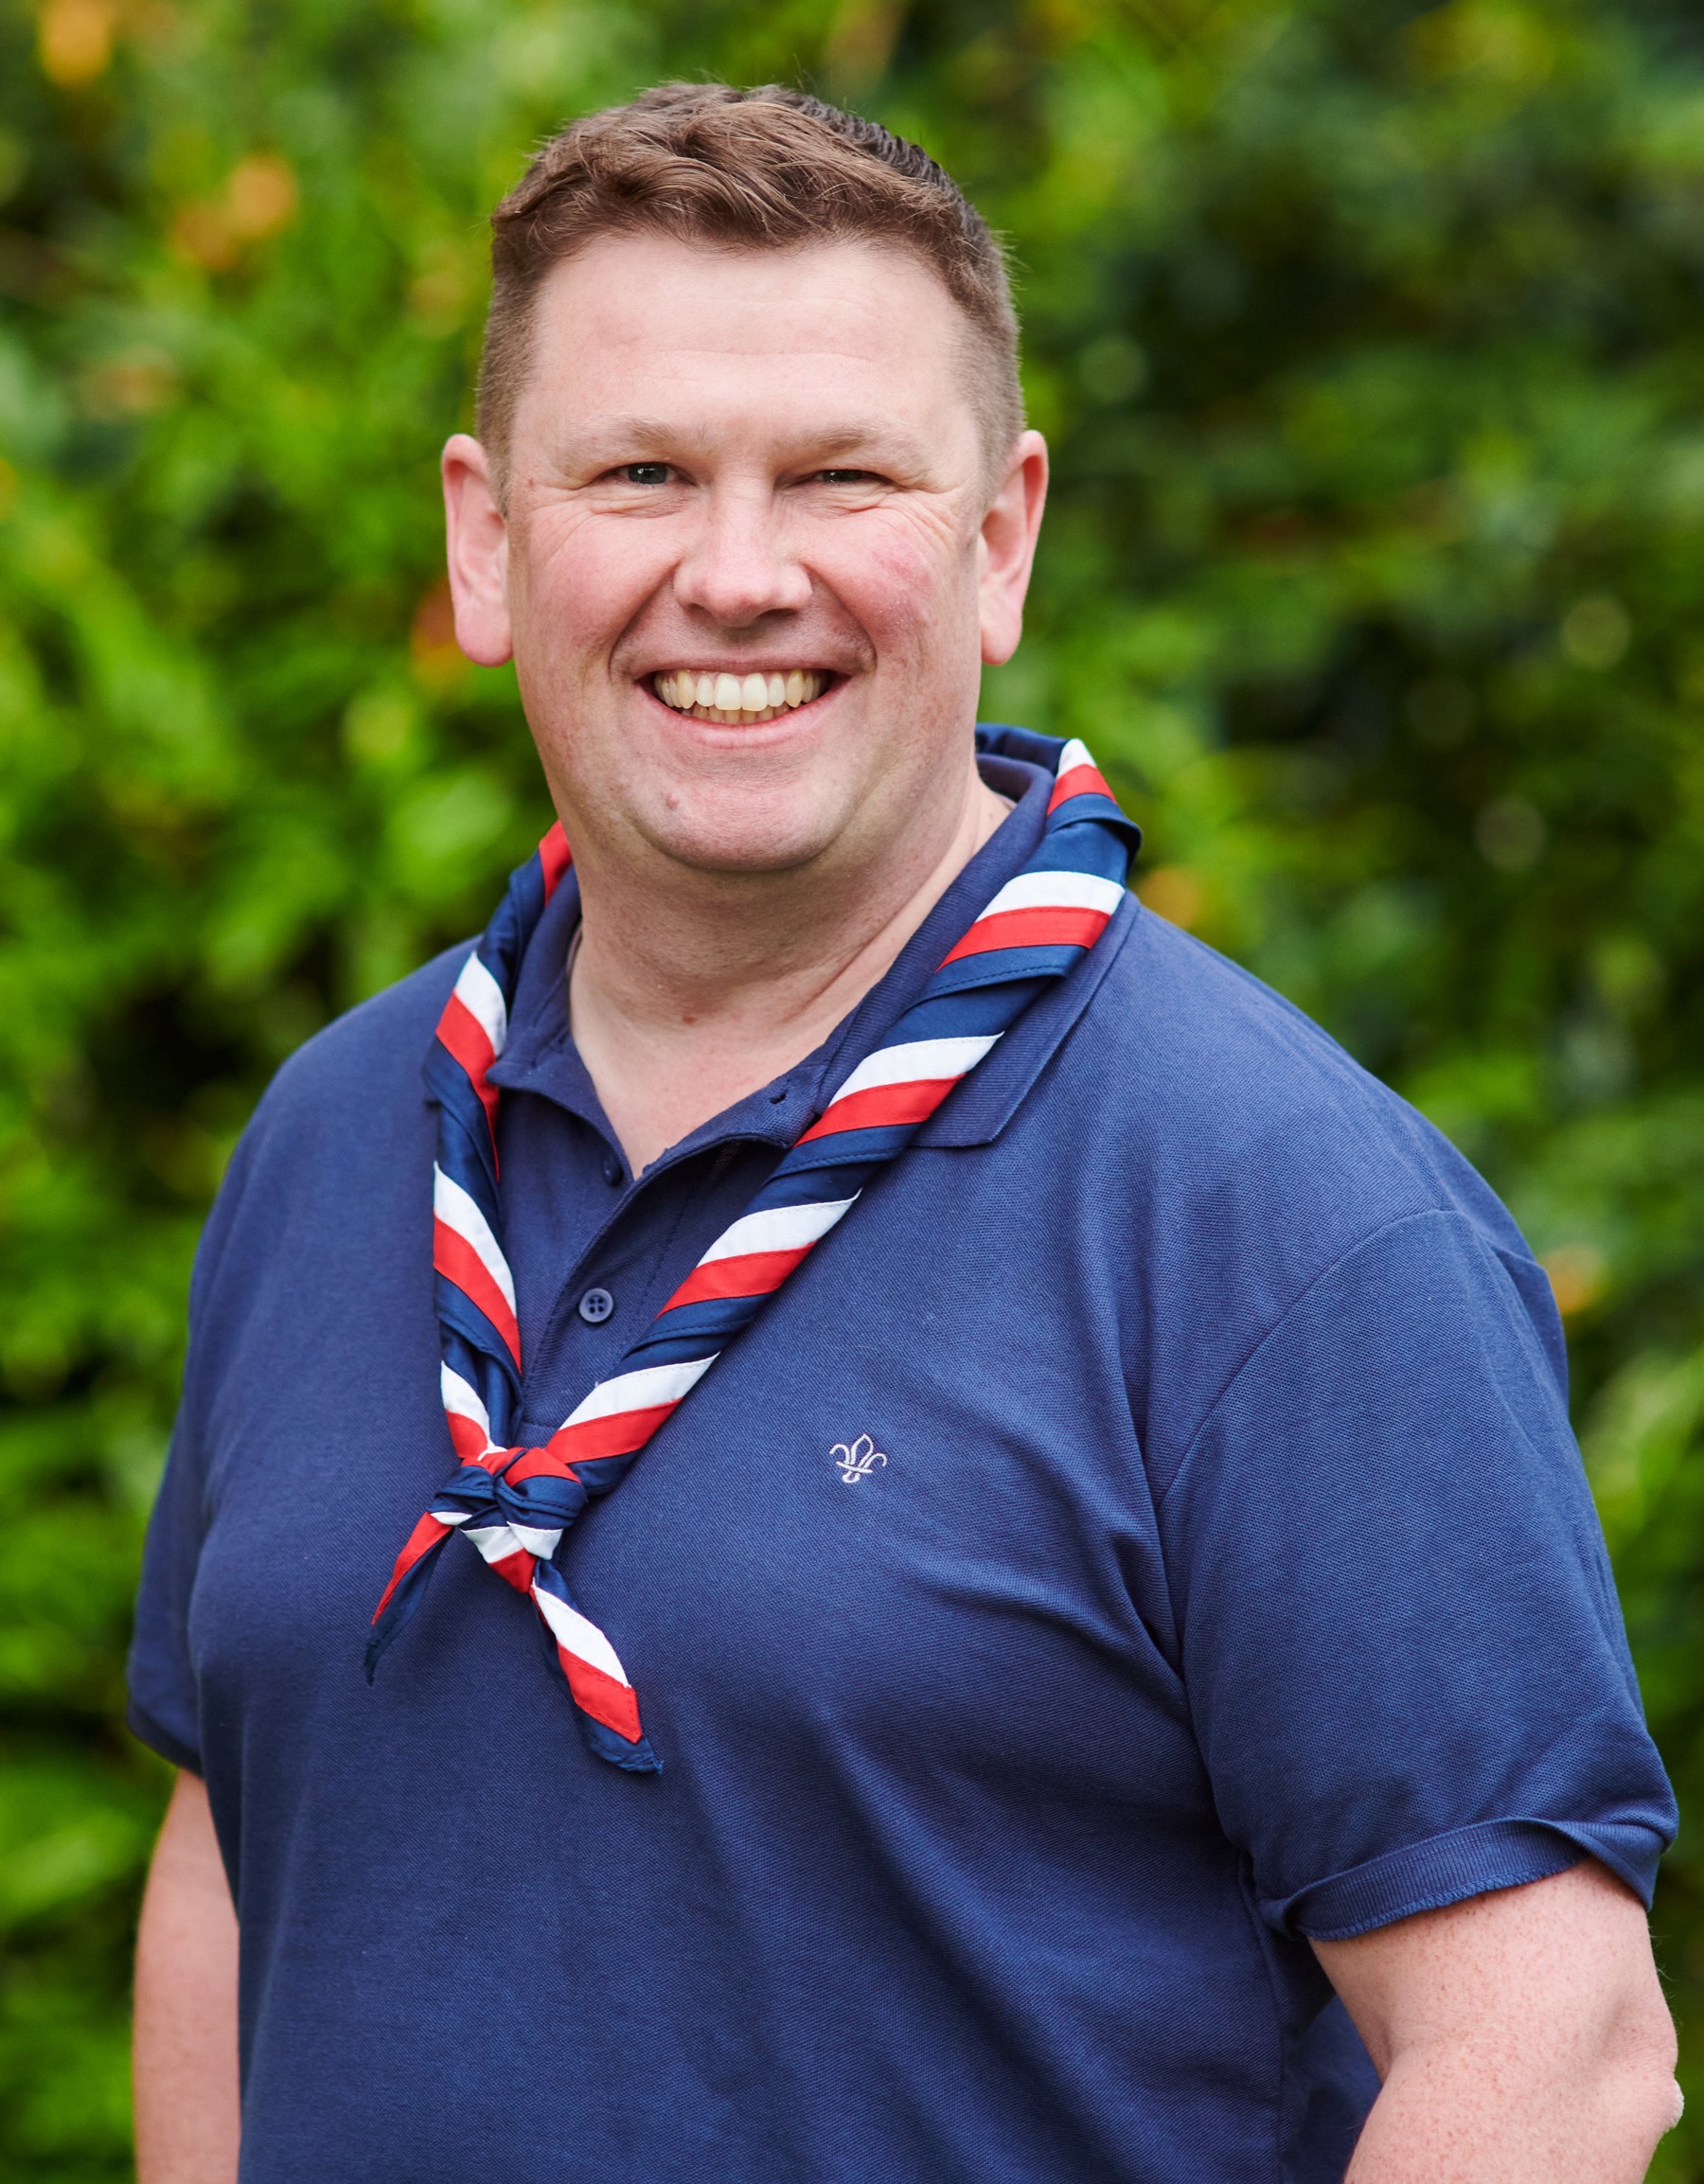 Craig Turpie smiling at the camera while wearing a navy Scouts polo shirt and stripy scarf